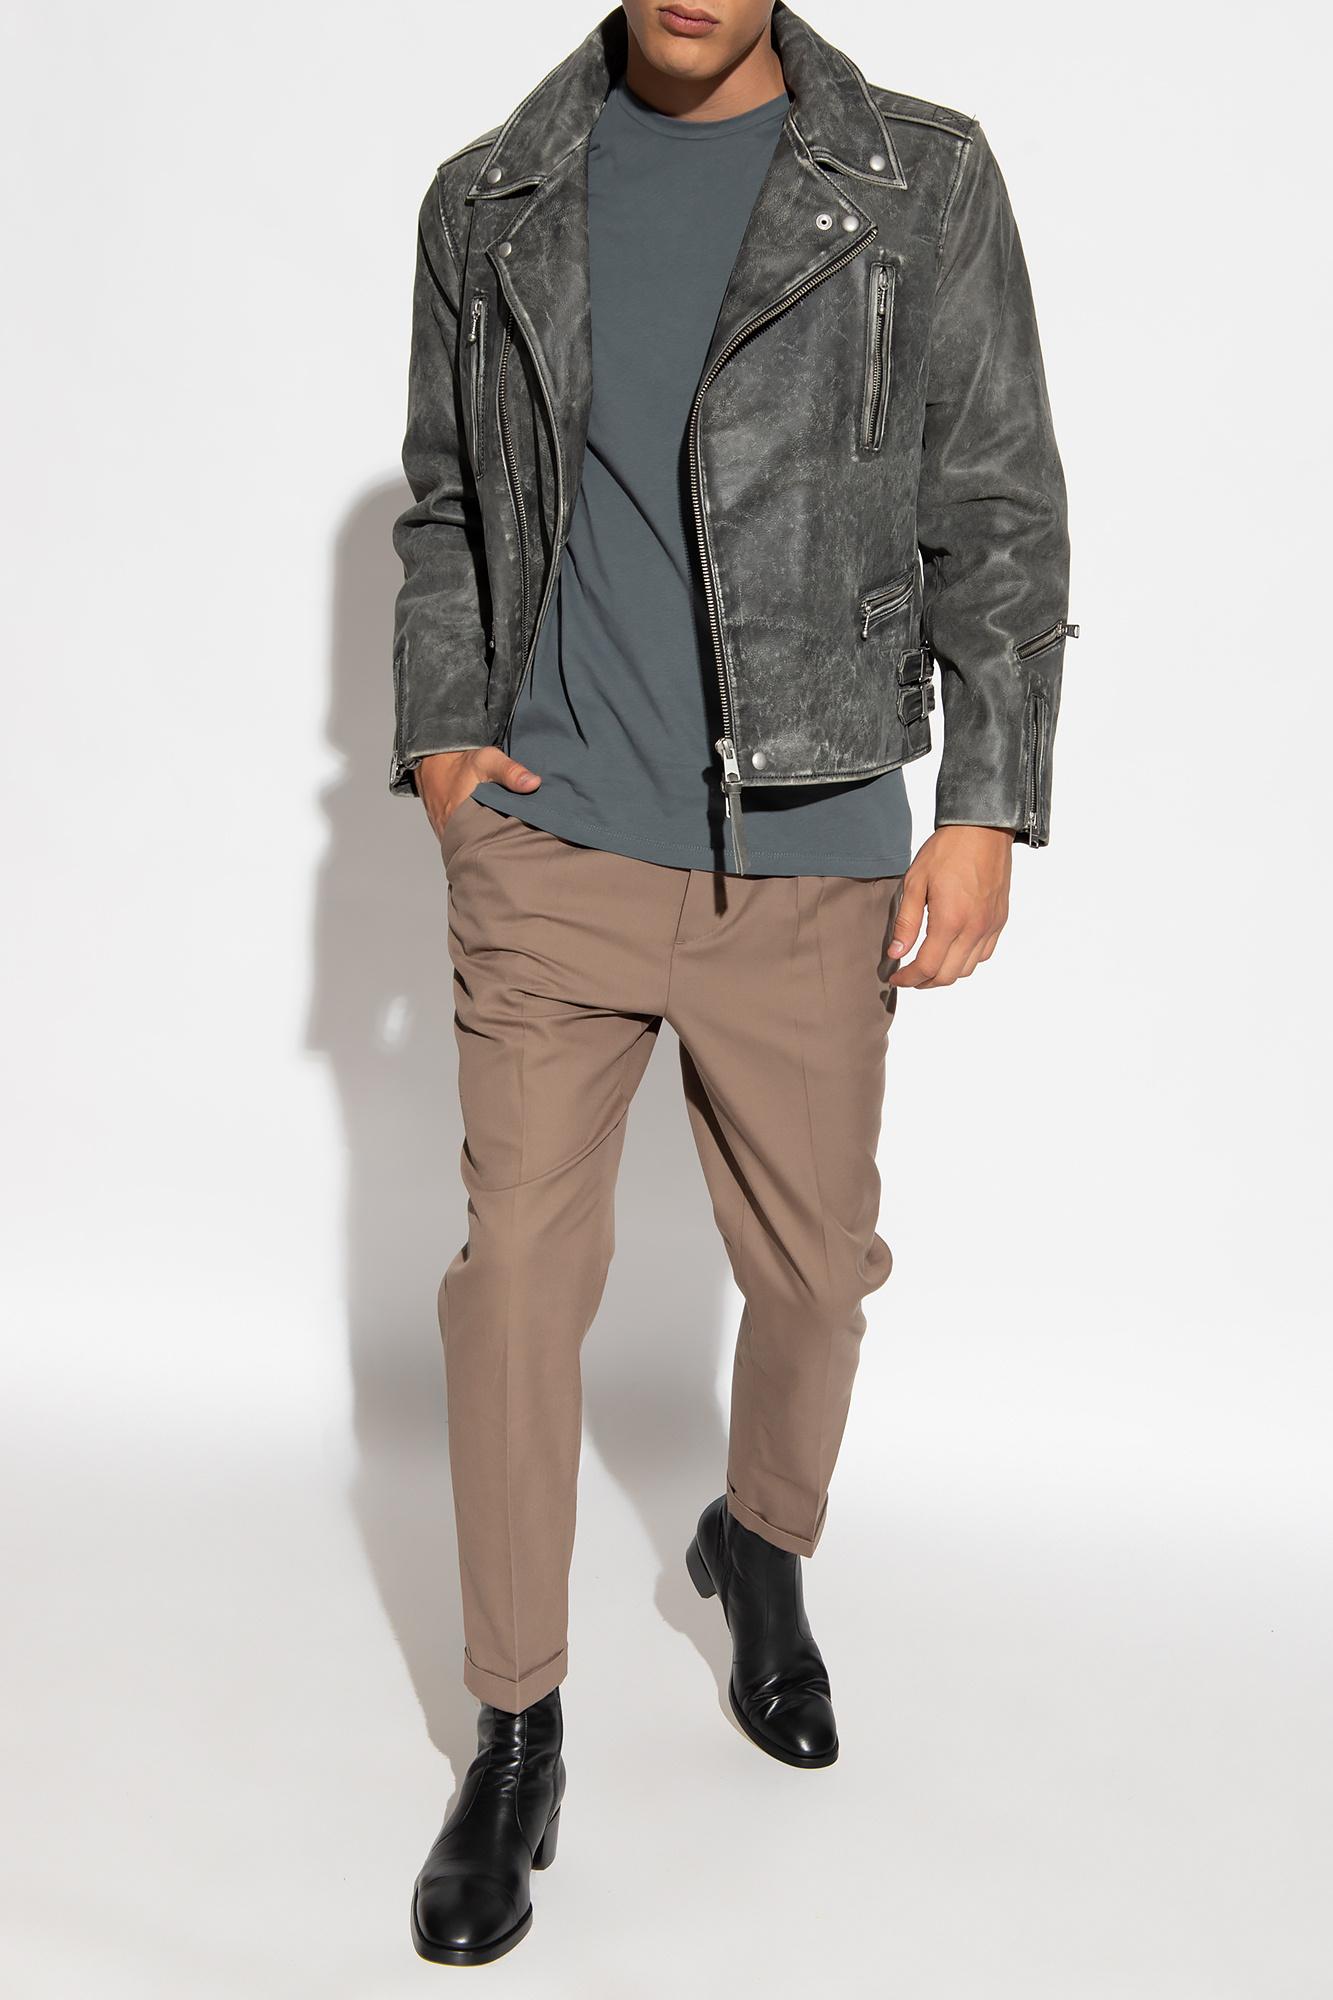 Men's AllSaints Leather jackets from $199 | Lyst - Page 2